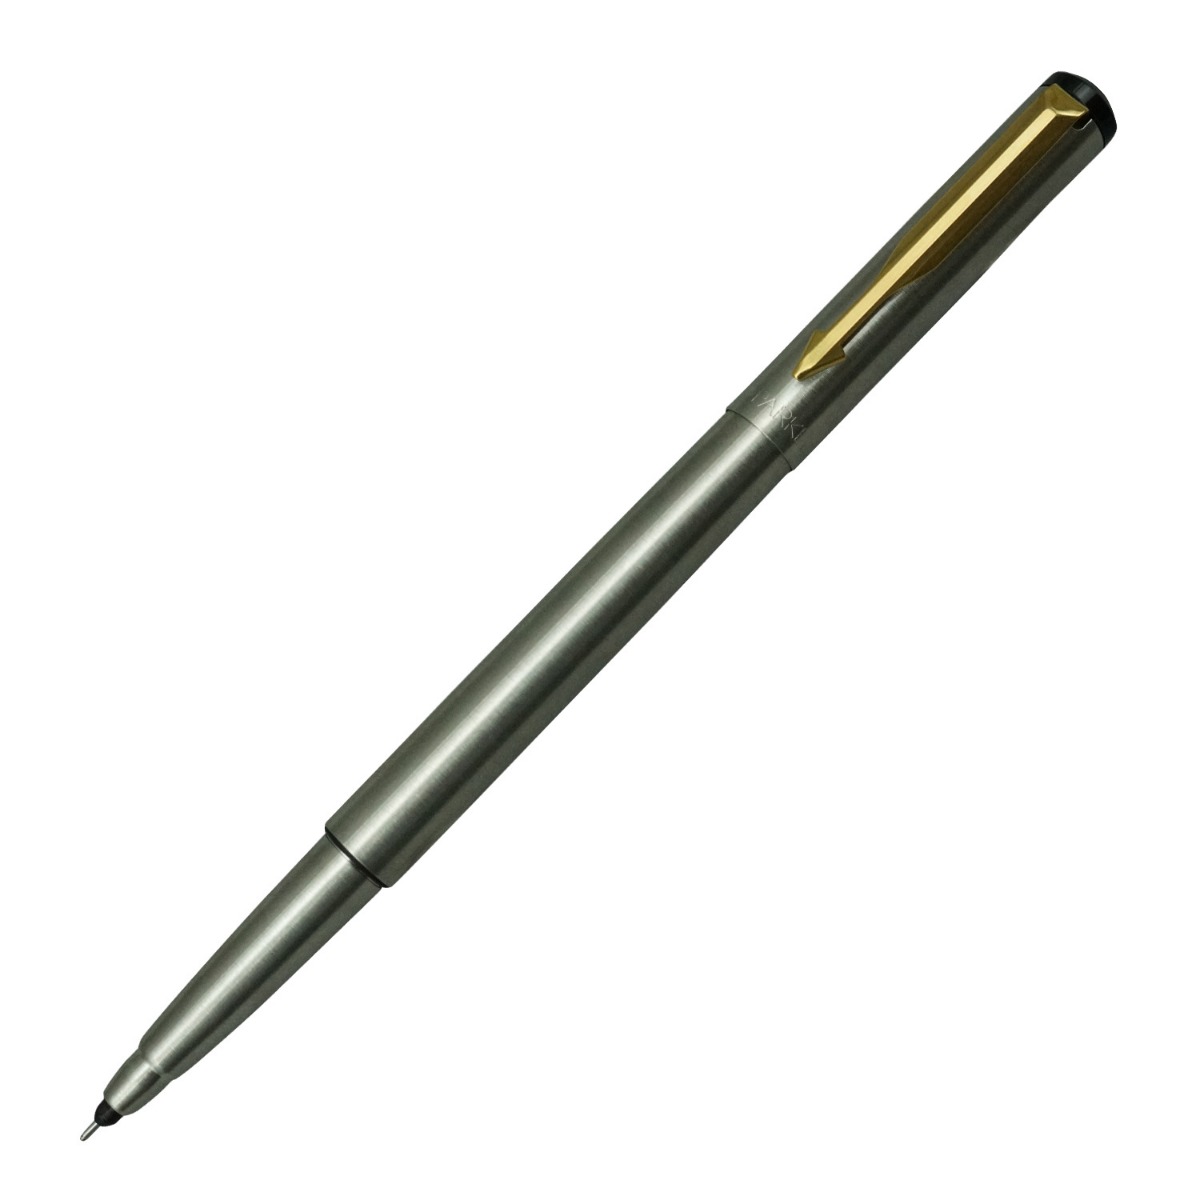 Parker  Vector  Model:16381  Silver Stainless  Color  Body  With Gold  Clip Cap Type Roller  Ball Pen